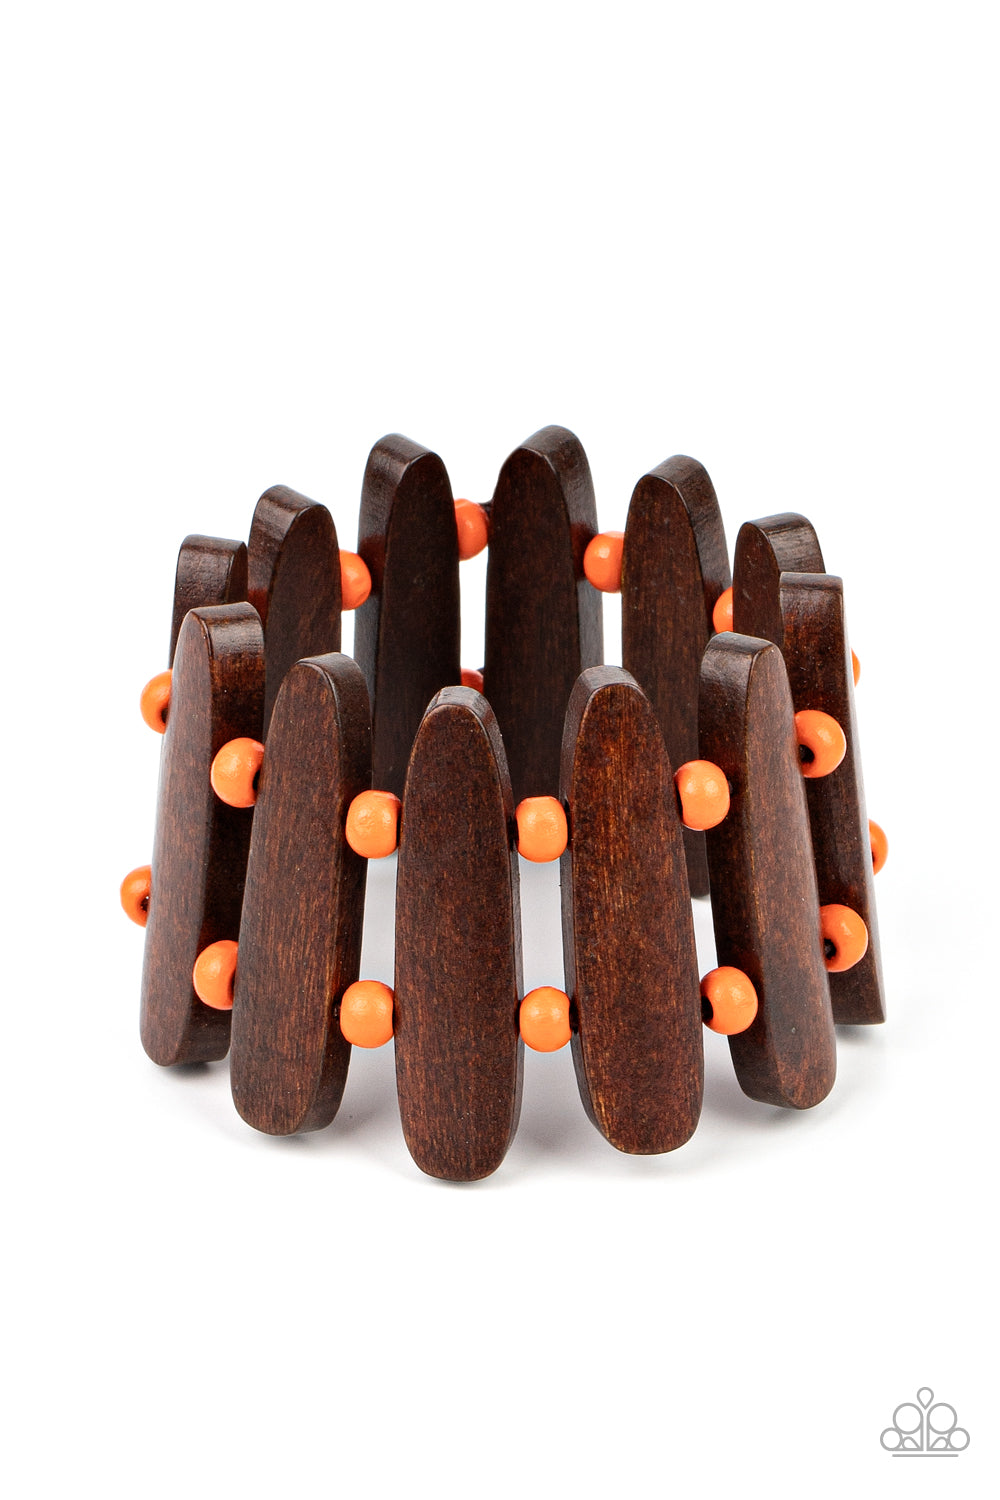 Pairs of Burnt Orange wooden beads and oblong brown wooden frames alternate along stretchy bands around the wrist for a seasonal pop of color.